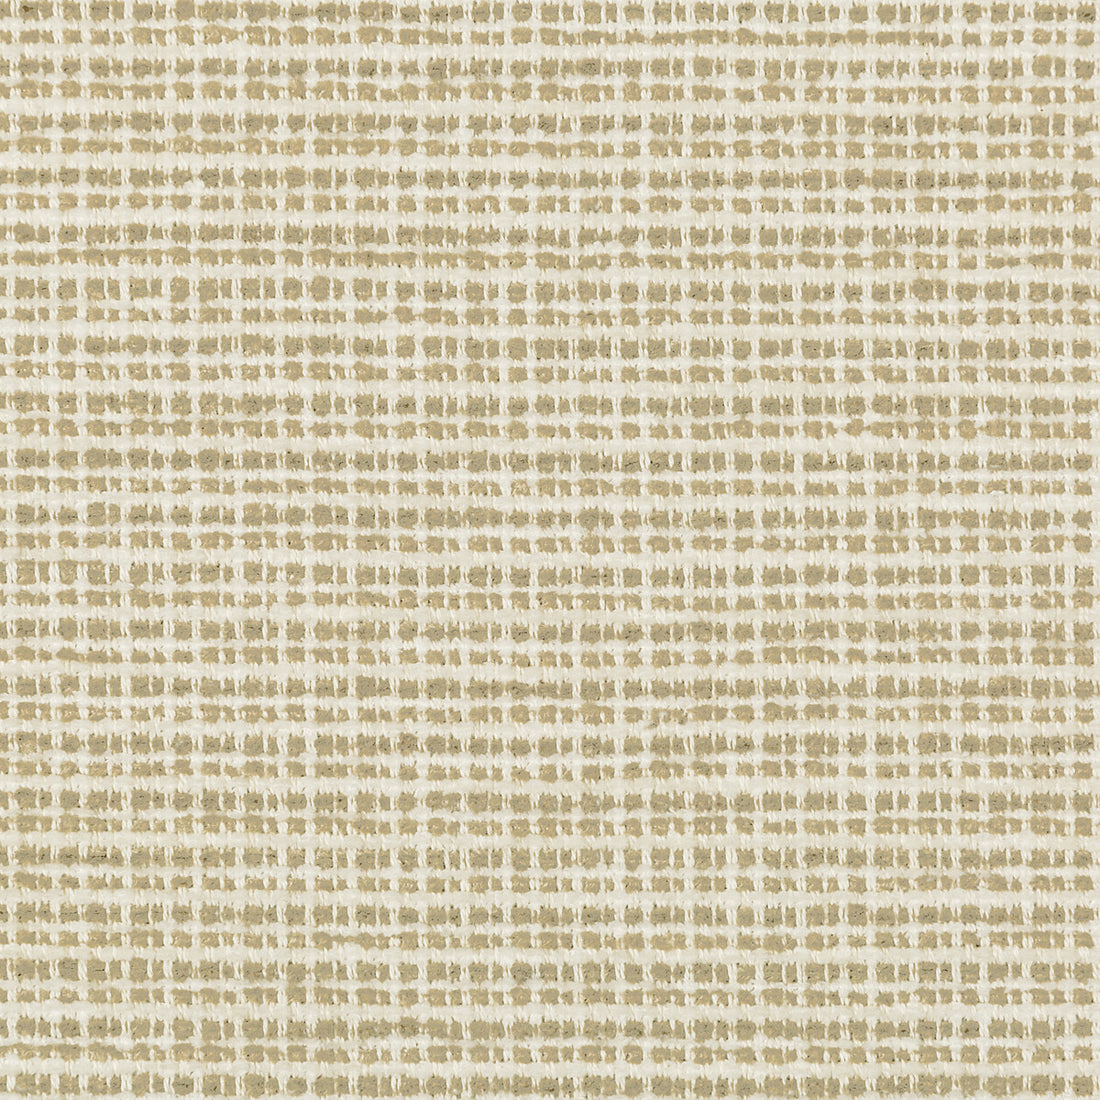 Freney Texture fabric in beige color - pattern 8019149.16.0 - by Brunschwig &amp; Fils in the Chambery Textures II collection